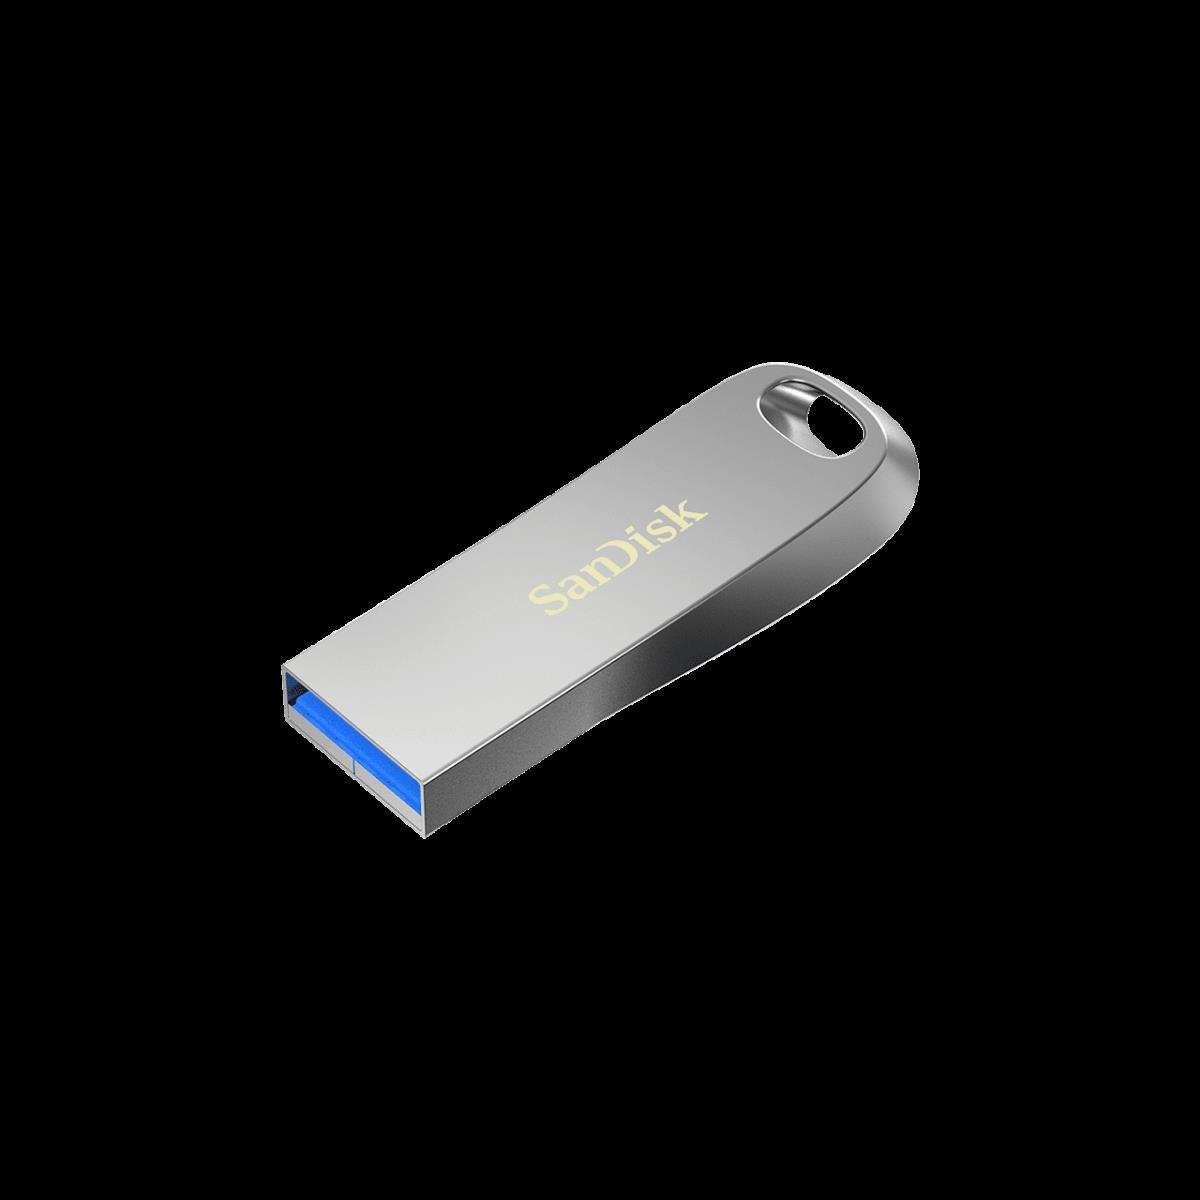 Picture of Sandisk SDCZ74-256G-A46 256GB Ultra Luxe USB 3.1 Flash Drive Type A, Metal